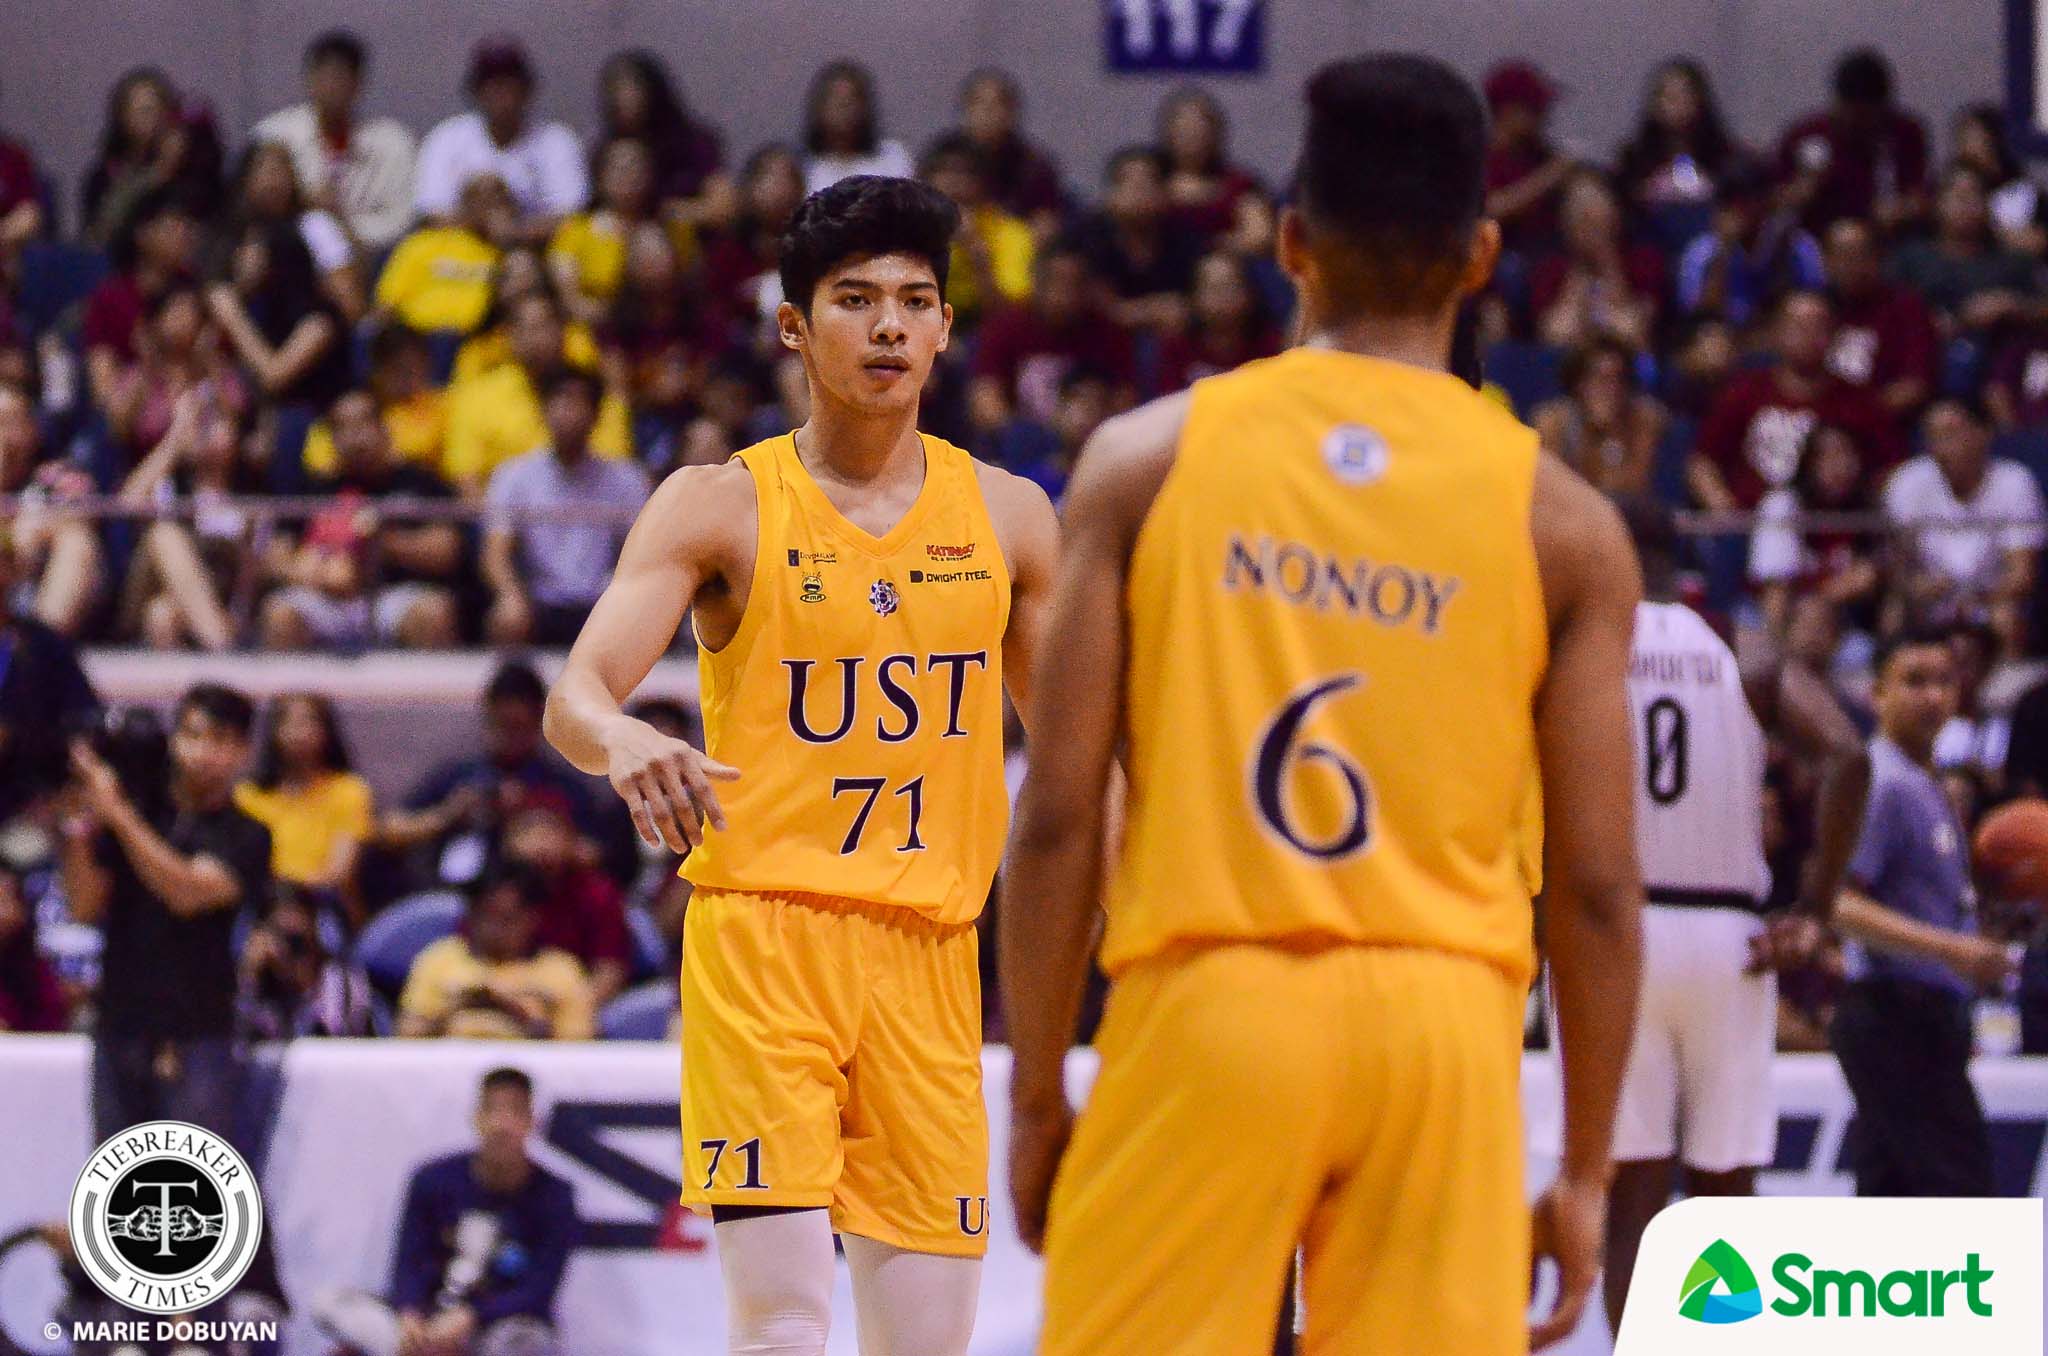 UAAP82-Mens-Basketball-UP-vs-UST-Cansino-3290 Mark Nonoy to savor final encounter with former UST teammate CJ Cansino Basketball DLSU News UAAP  - philippine sports news